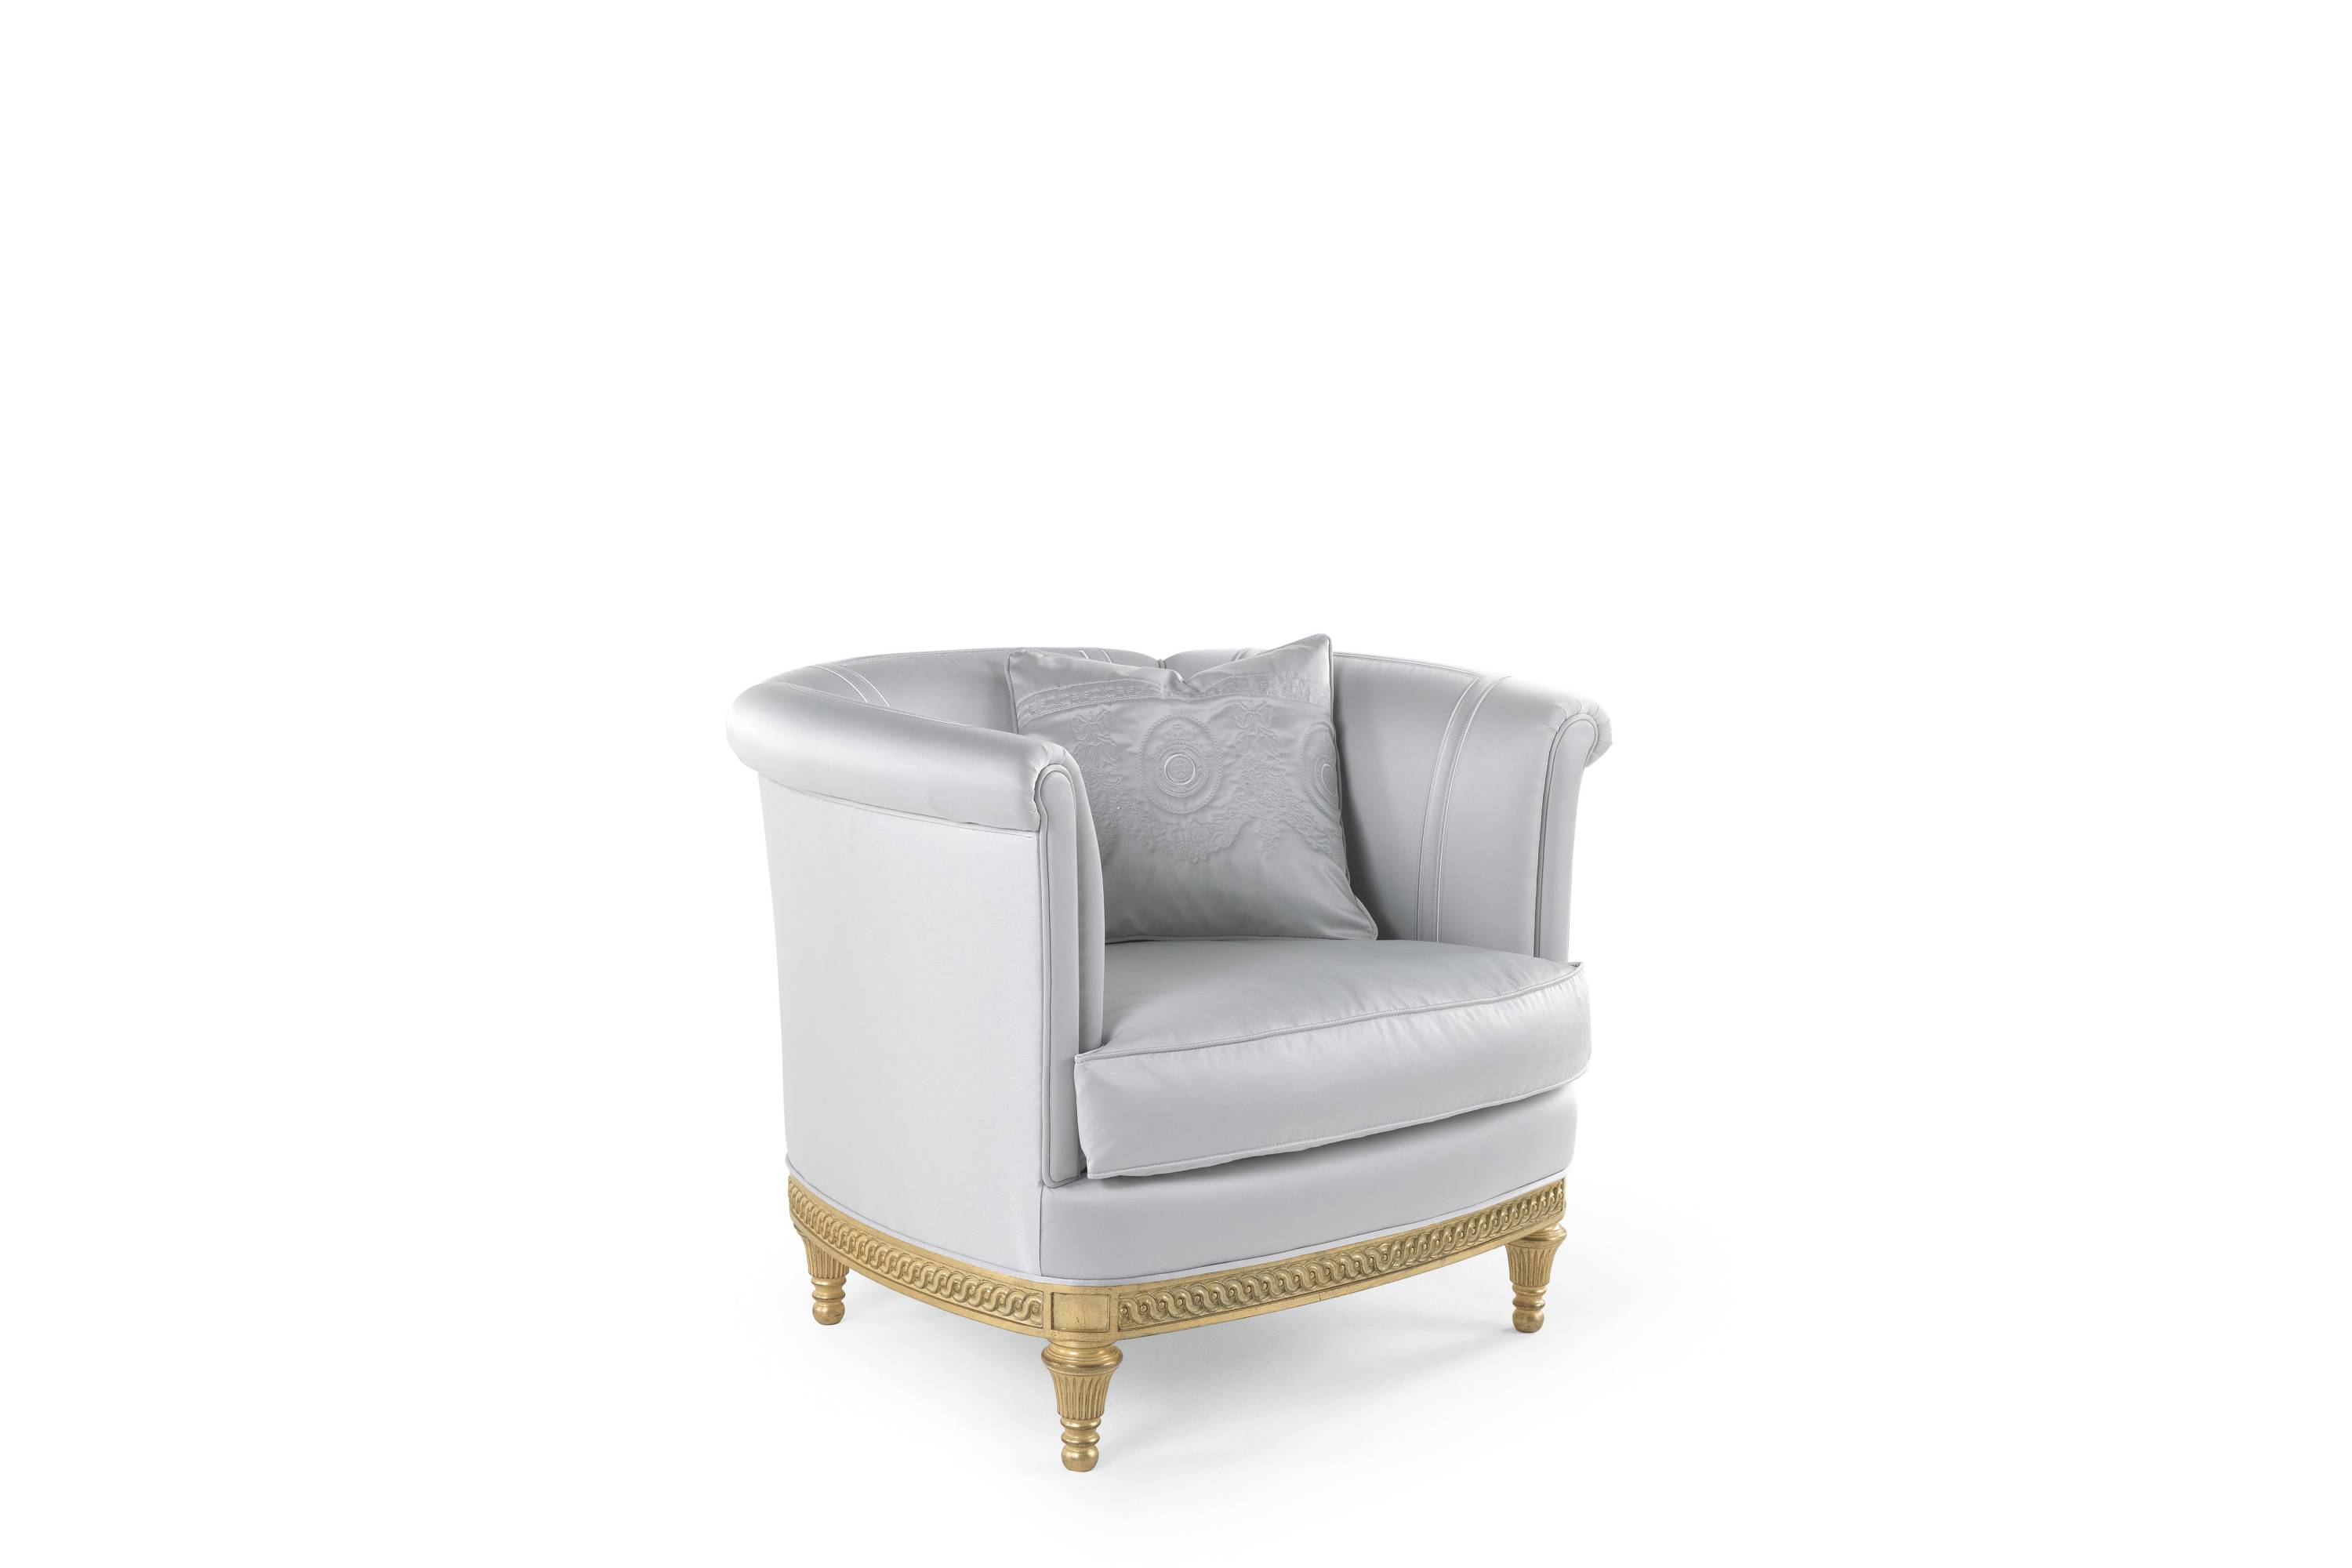 IVY armchair - A luxury experience with the Oro Bianco collection and its classic luxurious furniture